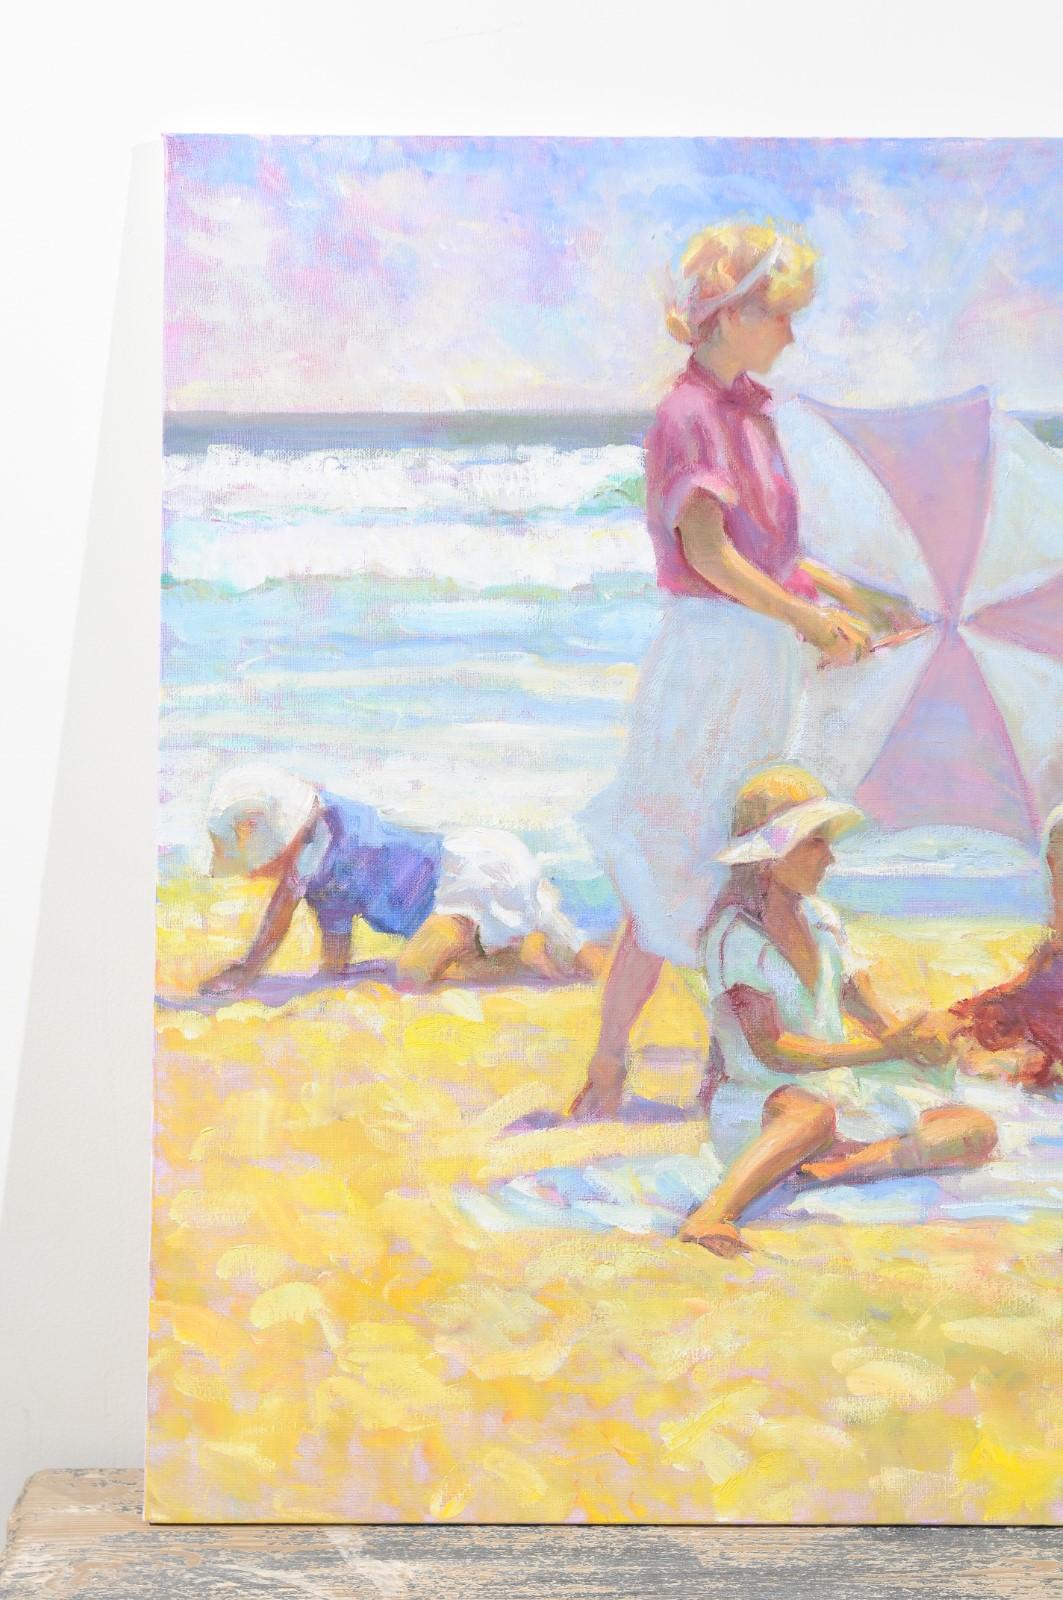 American Summer Moment by Don Hatfield, Original Contemporary Beach Scene Oil Painting